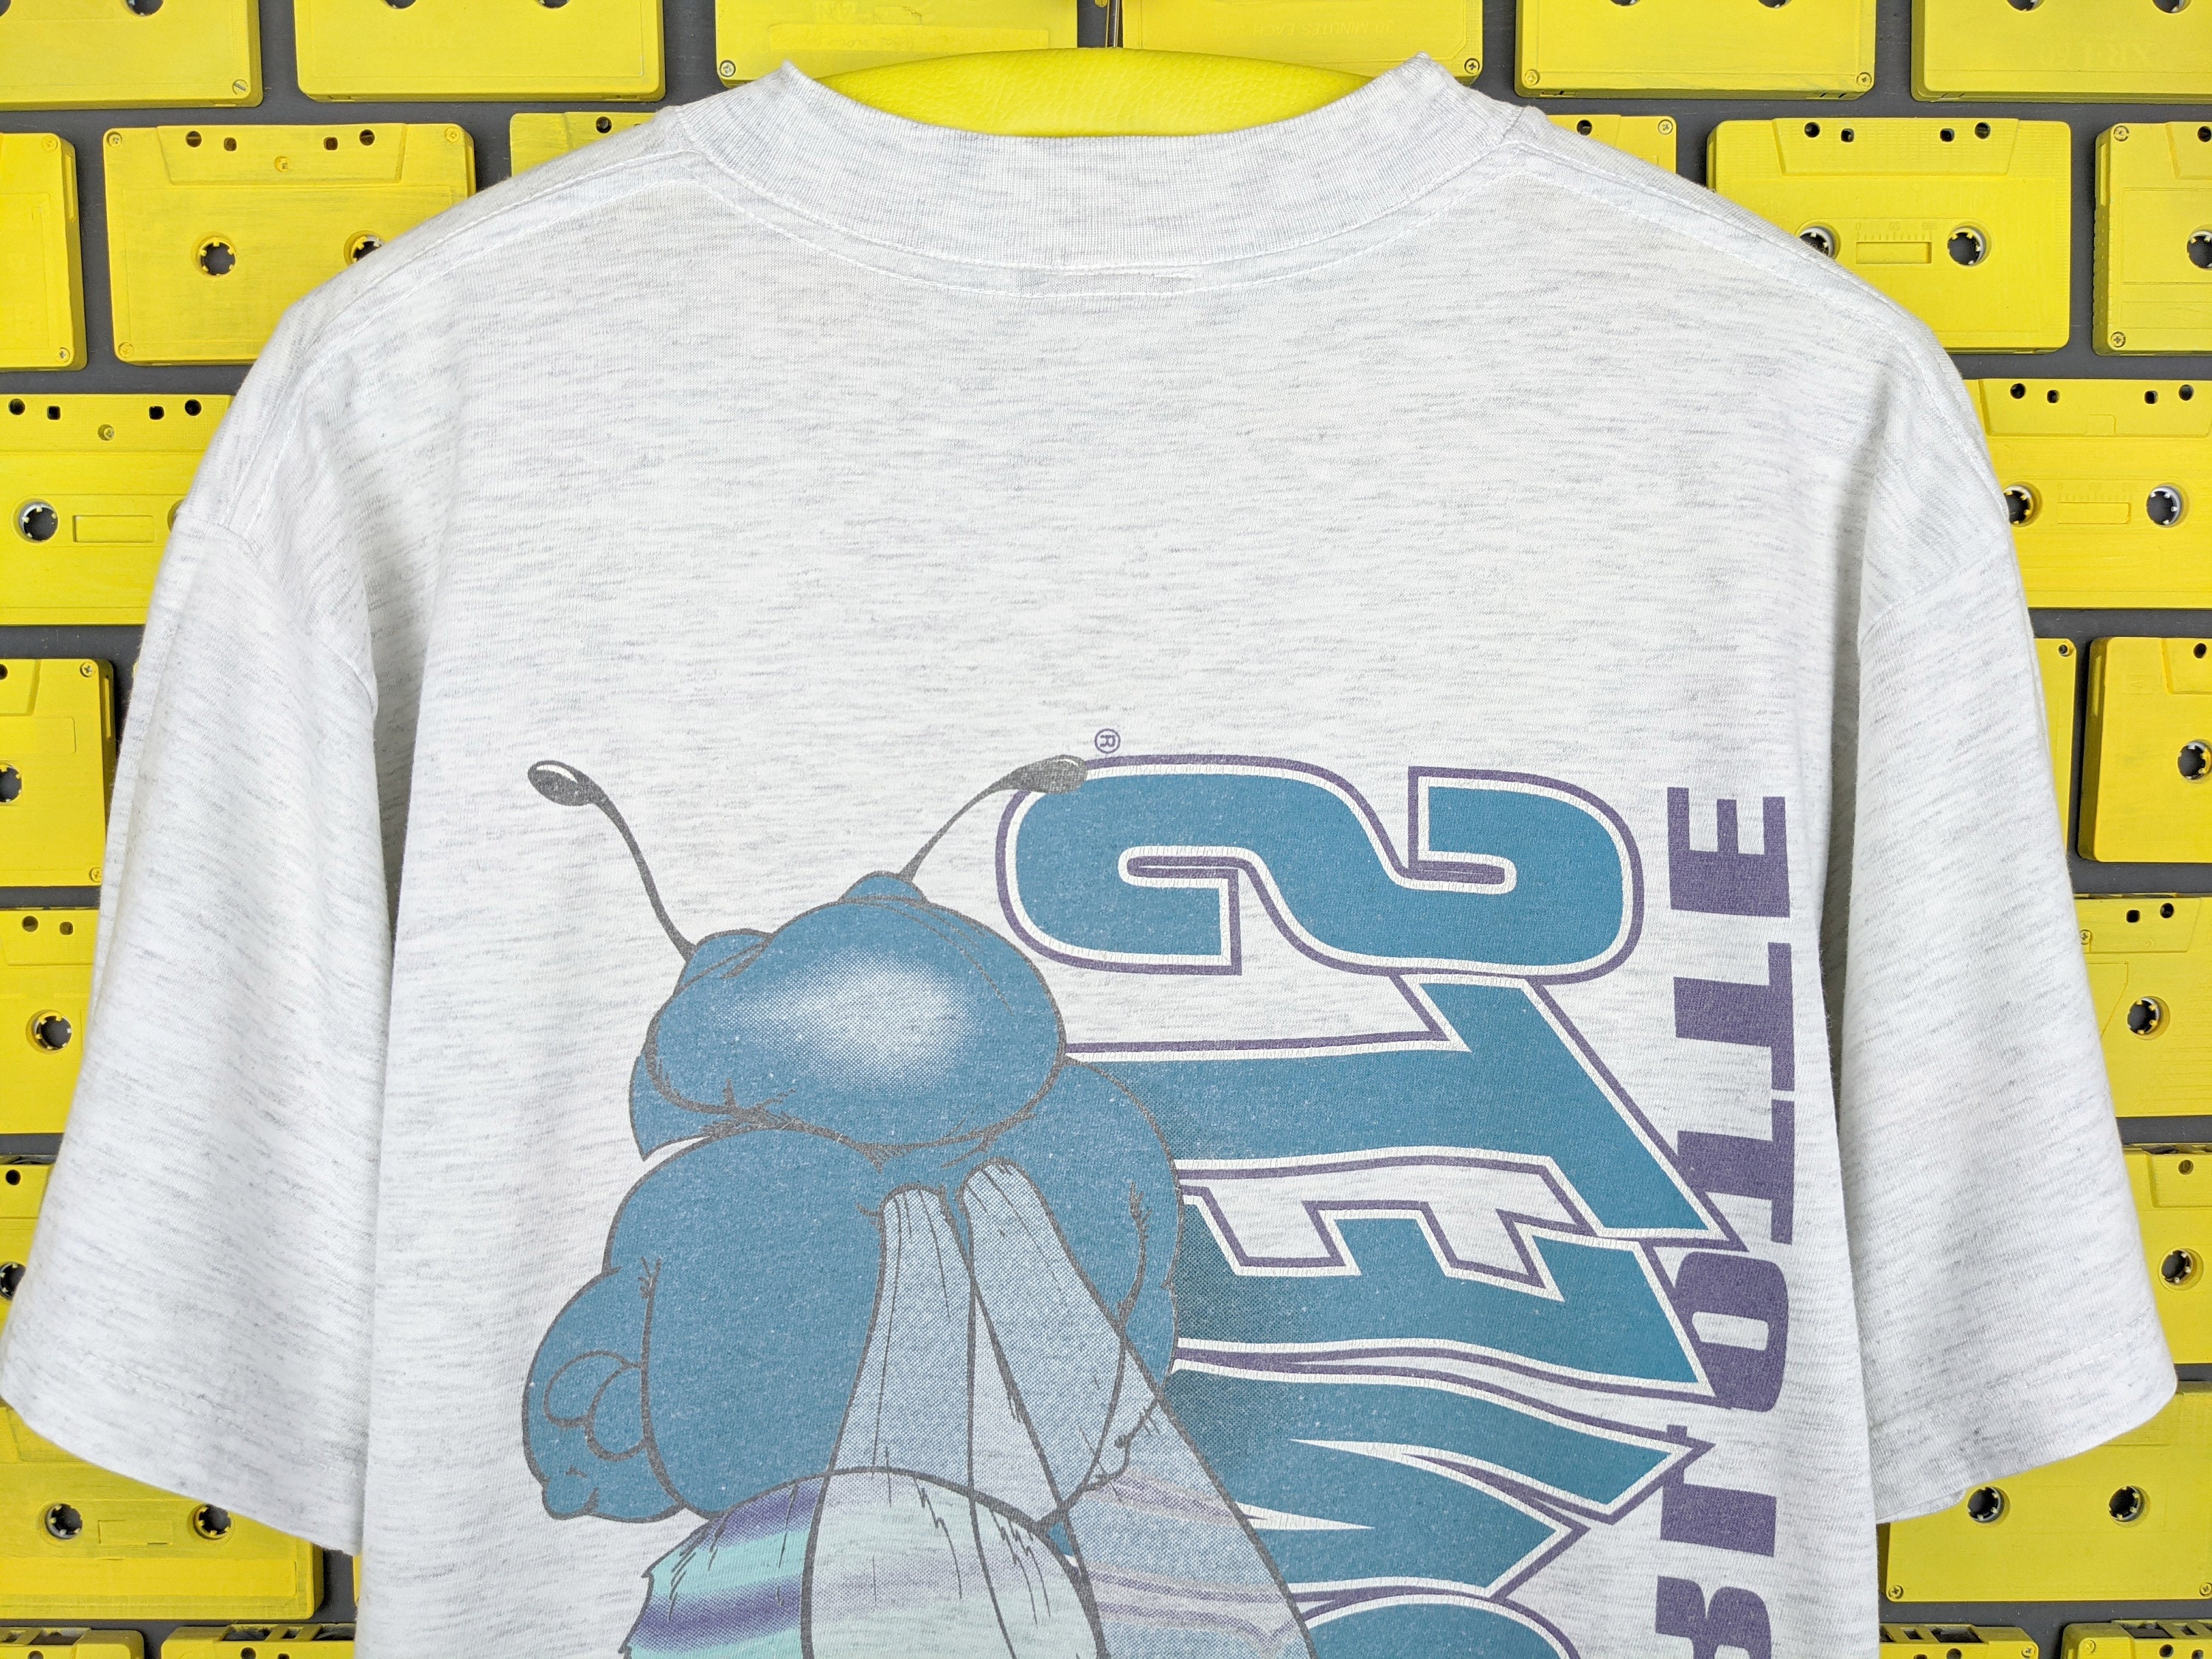 Vintage Charlotte Hornets Facts Tee Shirt